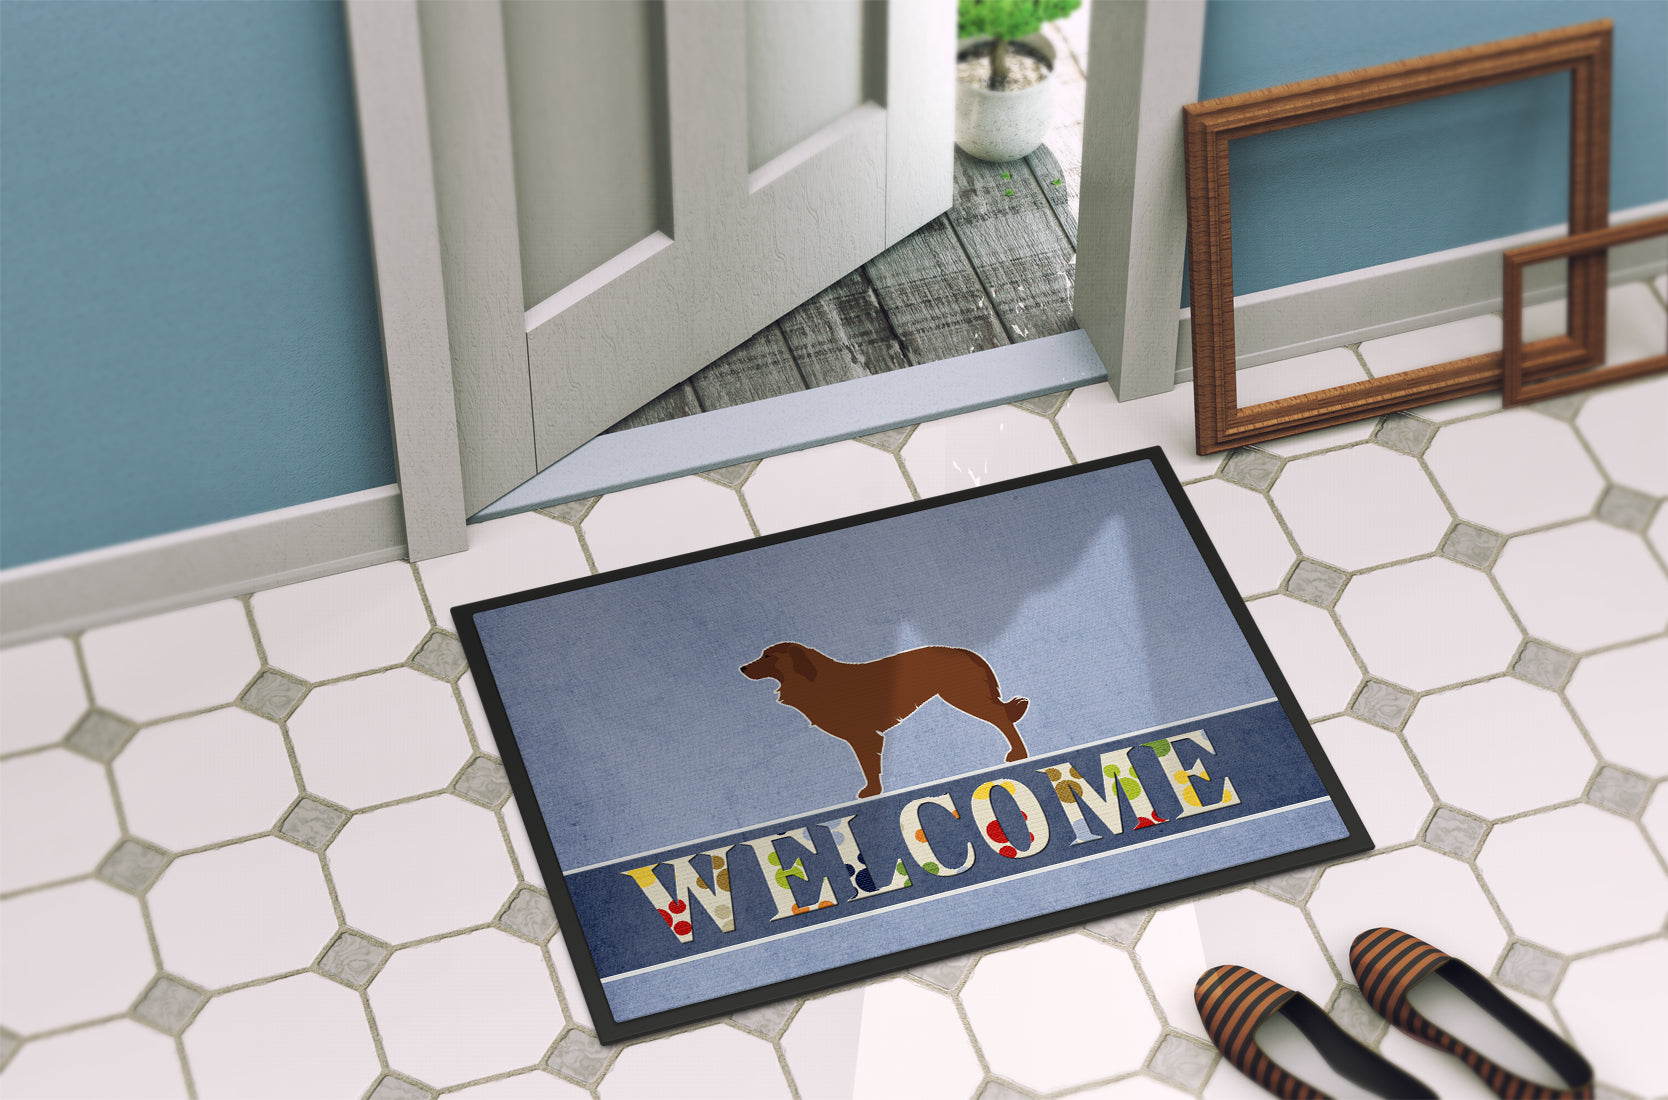 Portuguese Sheepdog Dog Welcome Indoor or Outdoor Mat 18x27 BB5535MAT - the-store.com